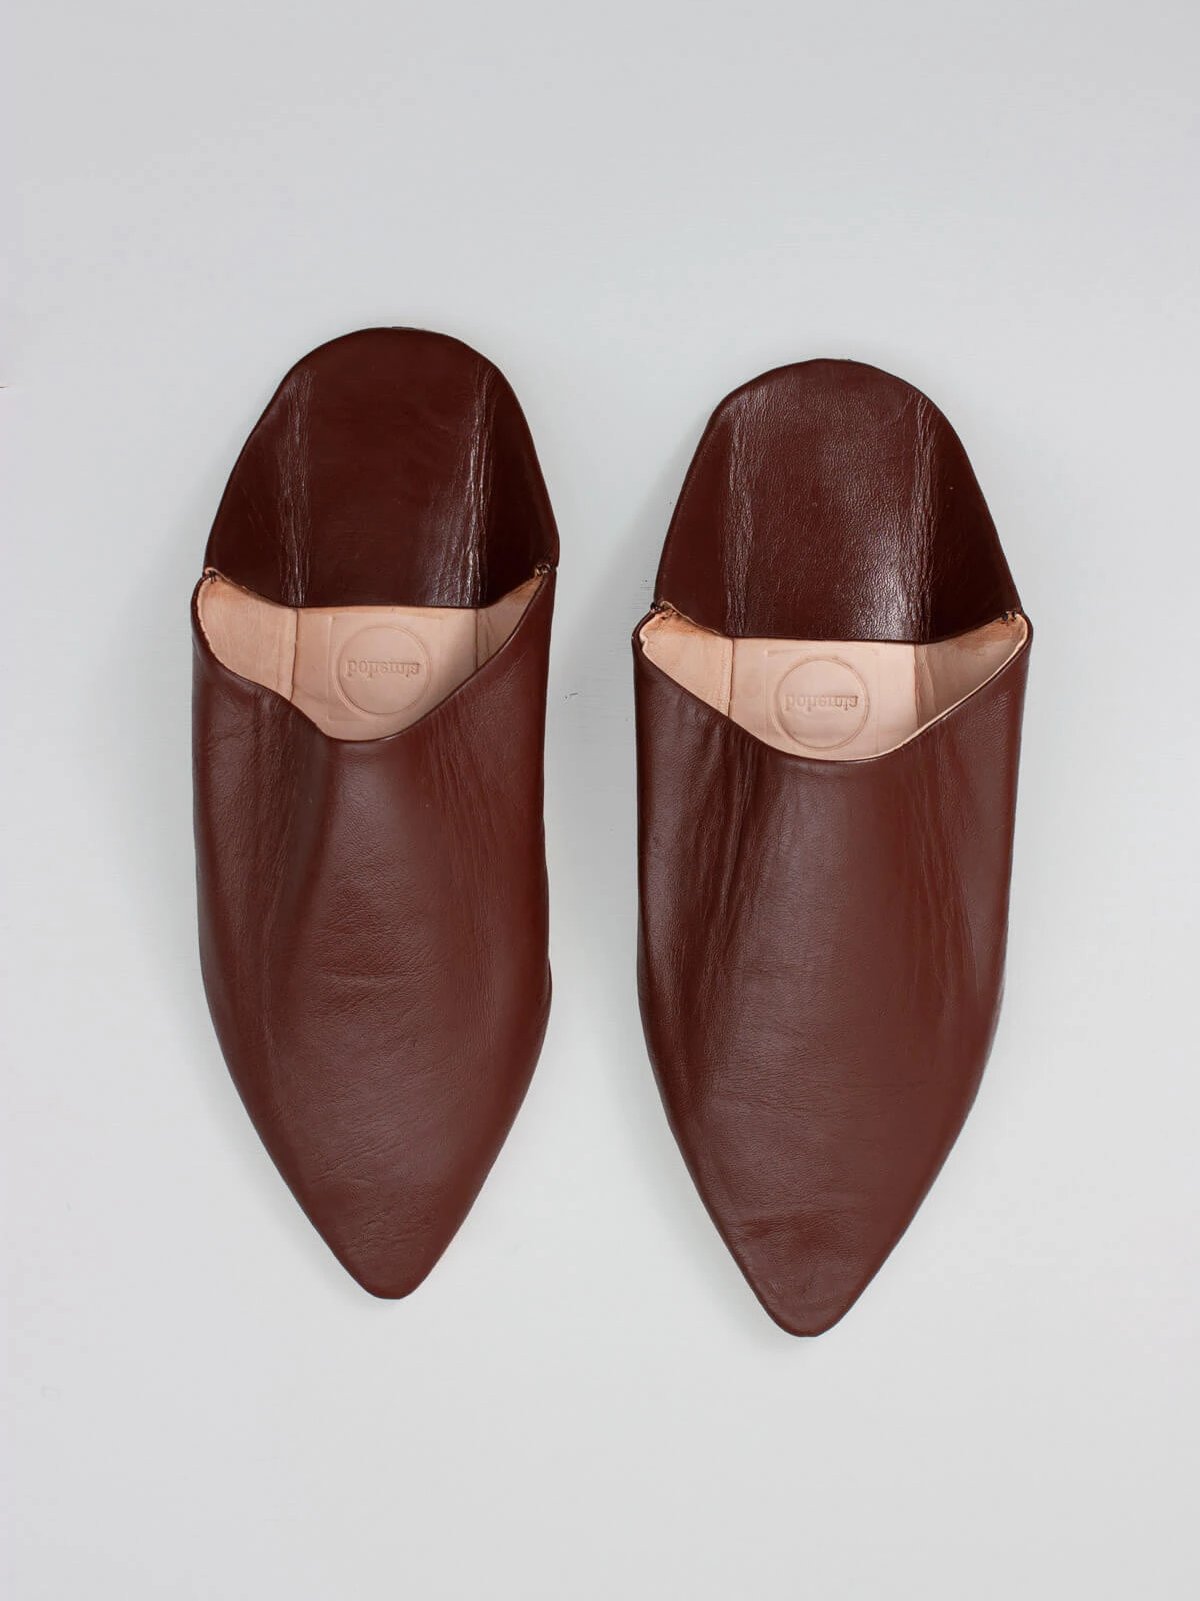 Moroccan Mens Pointed Babouche Slippers, Chocolate